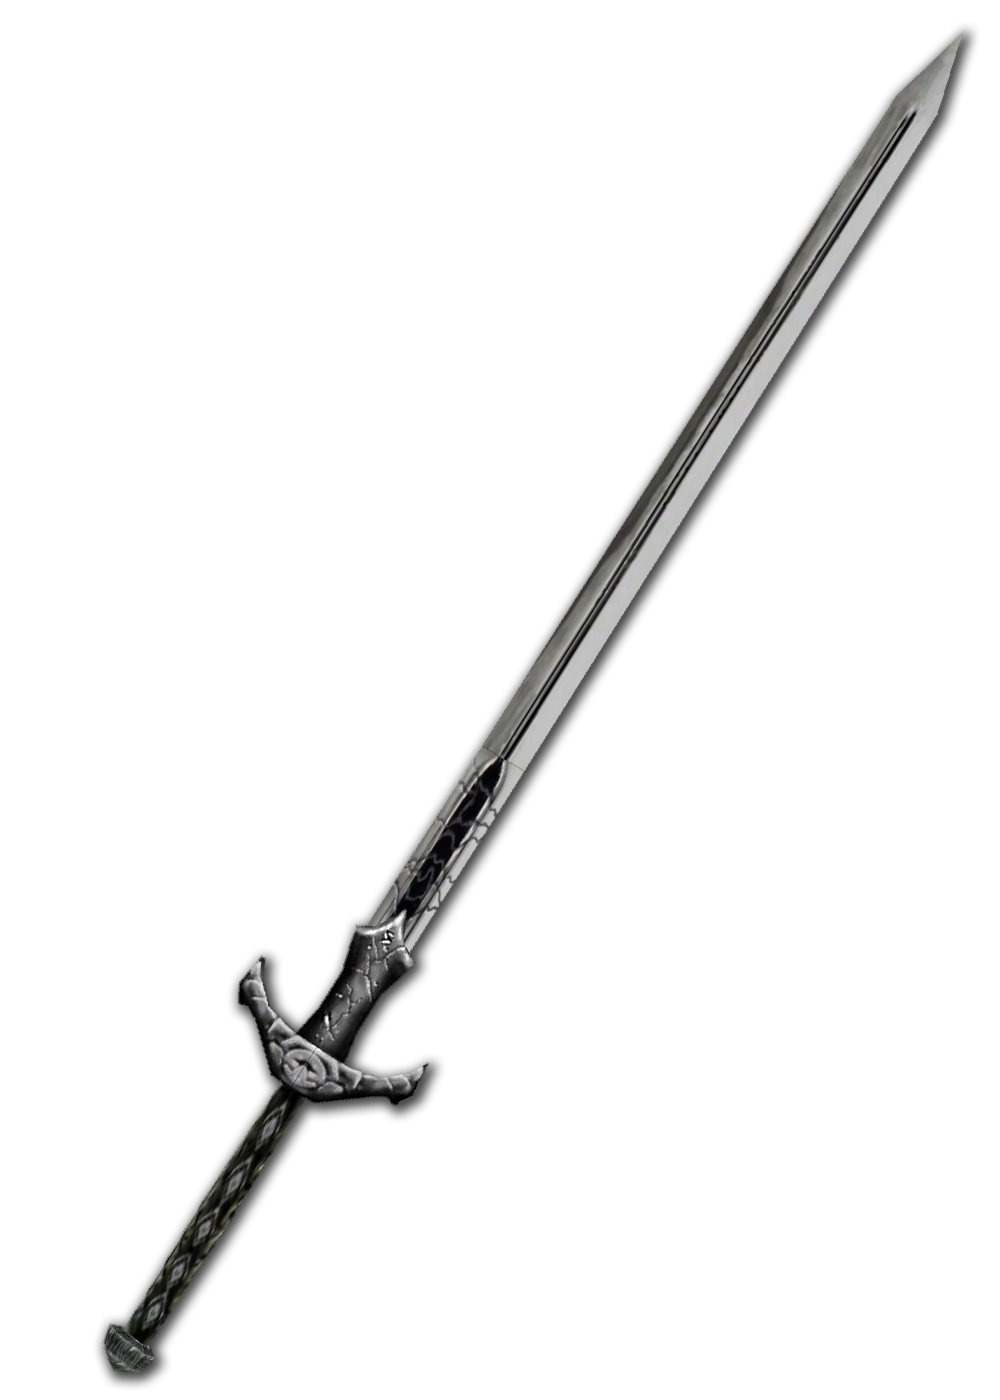 sword-png-from-pngfre-14